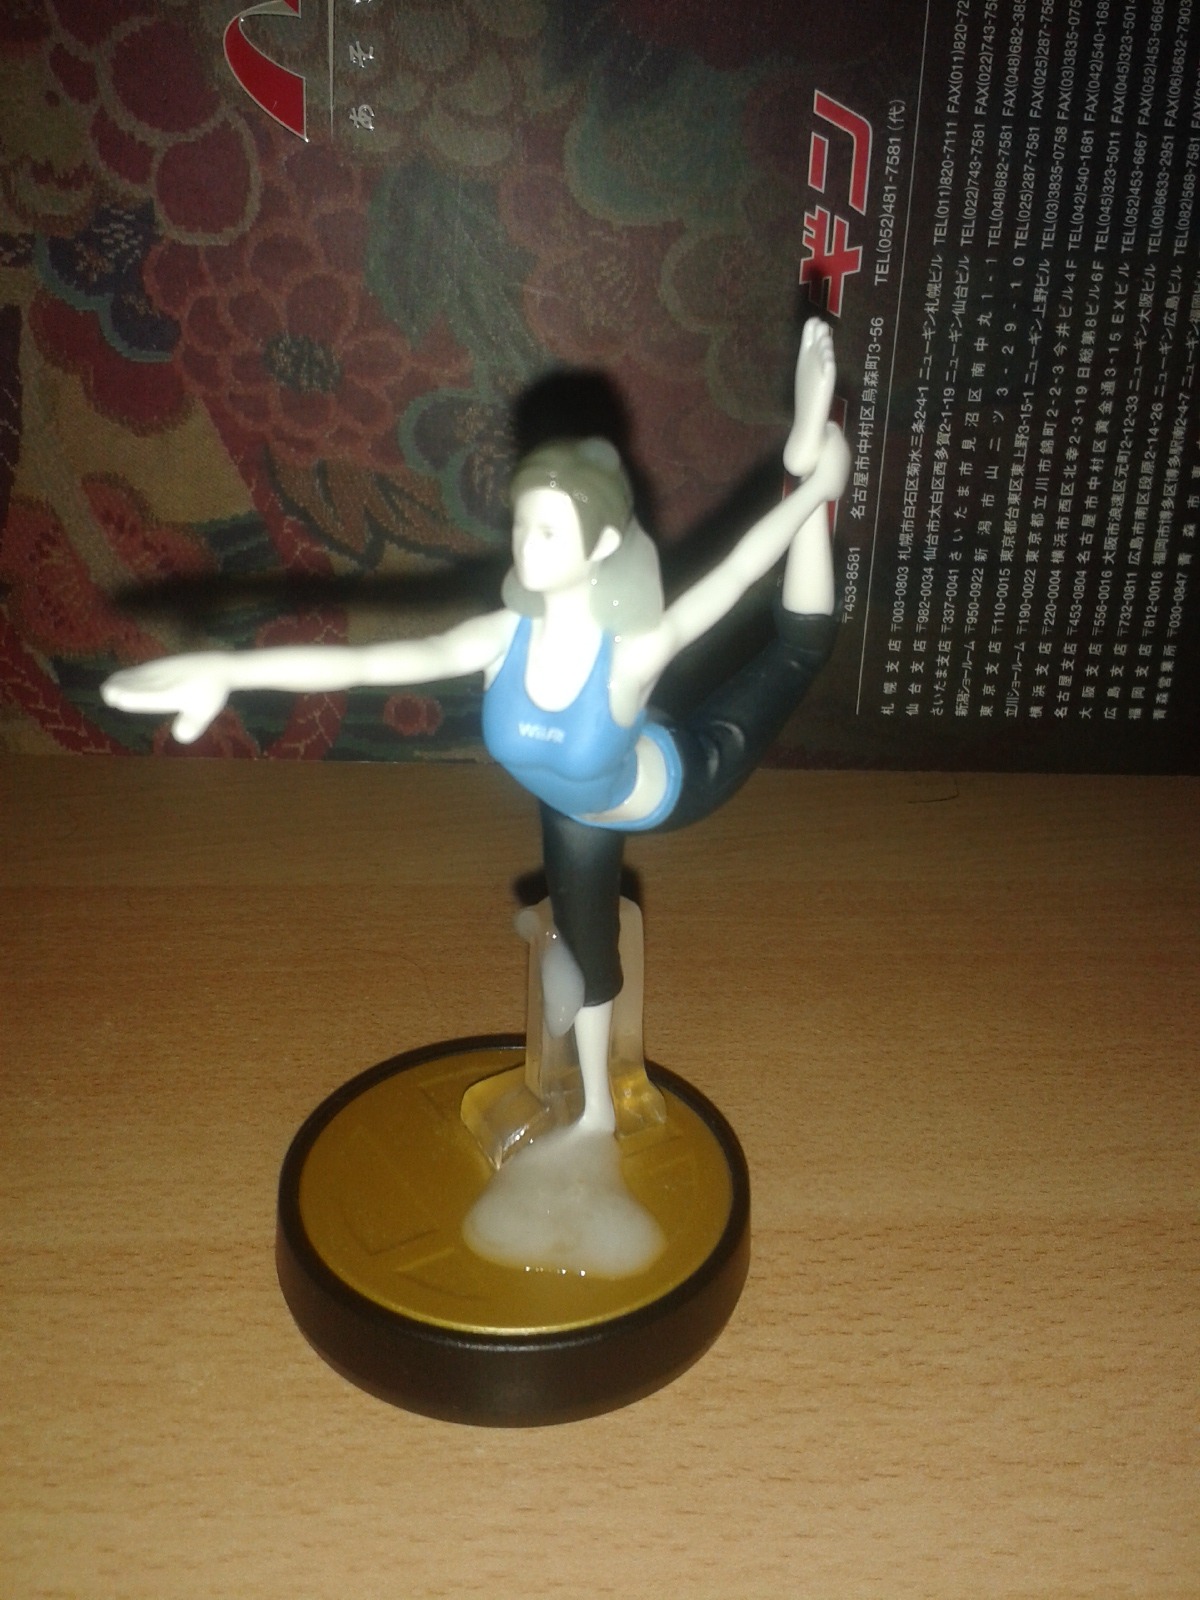 Since I get a lot of Amiibo requests&hellip;Wii Fit Trainer! Cuz she&rsquo;s